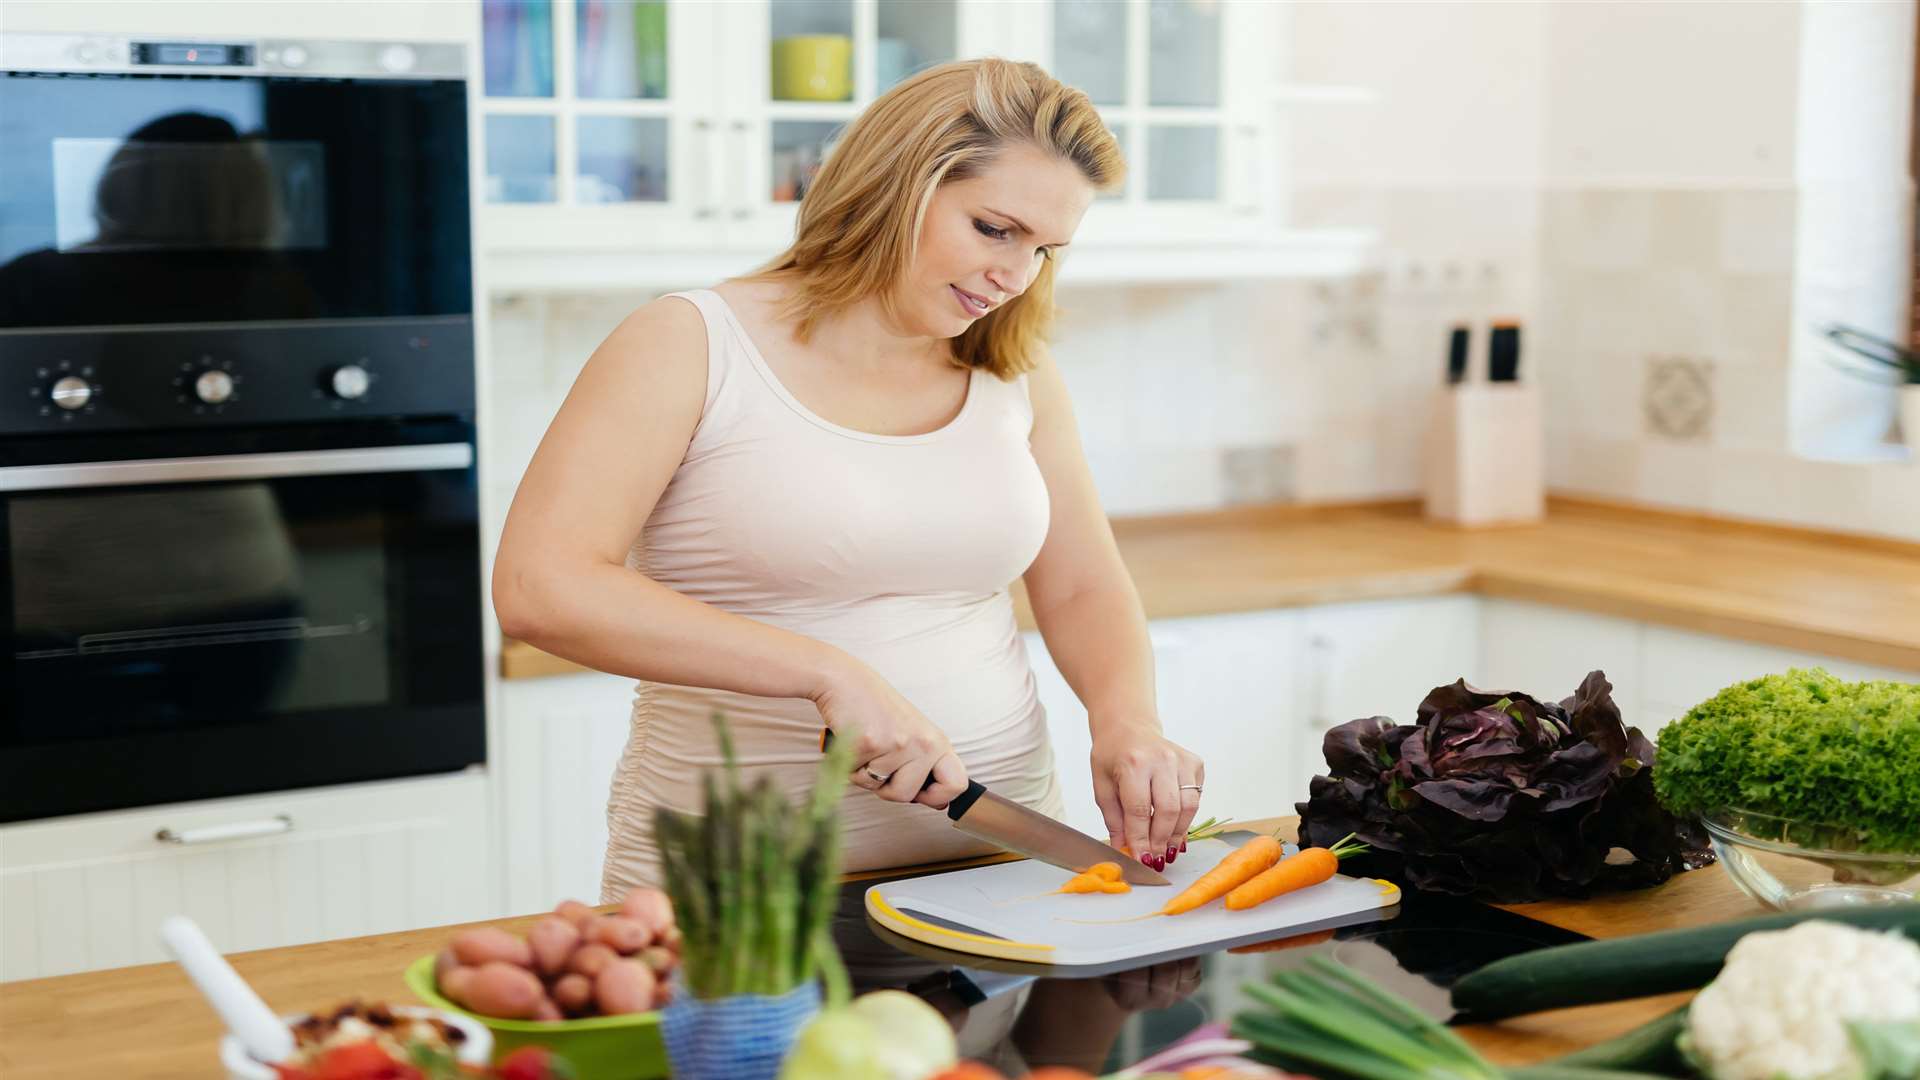 Eating a healthy diet full of fruit and vegetables is important for all the family, including pregnant women and children